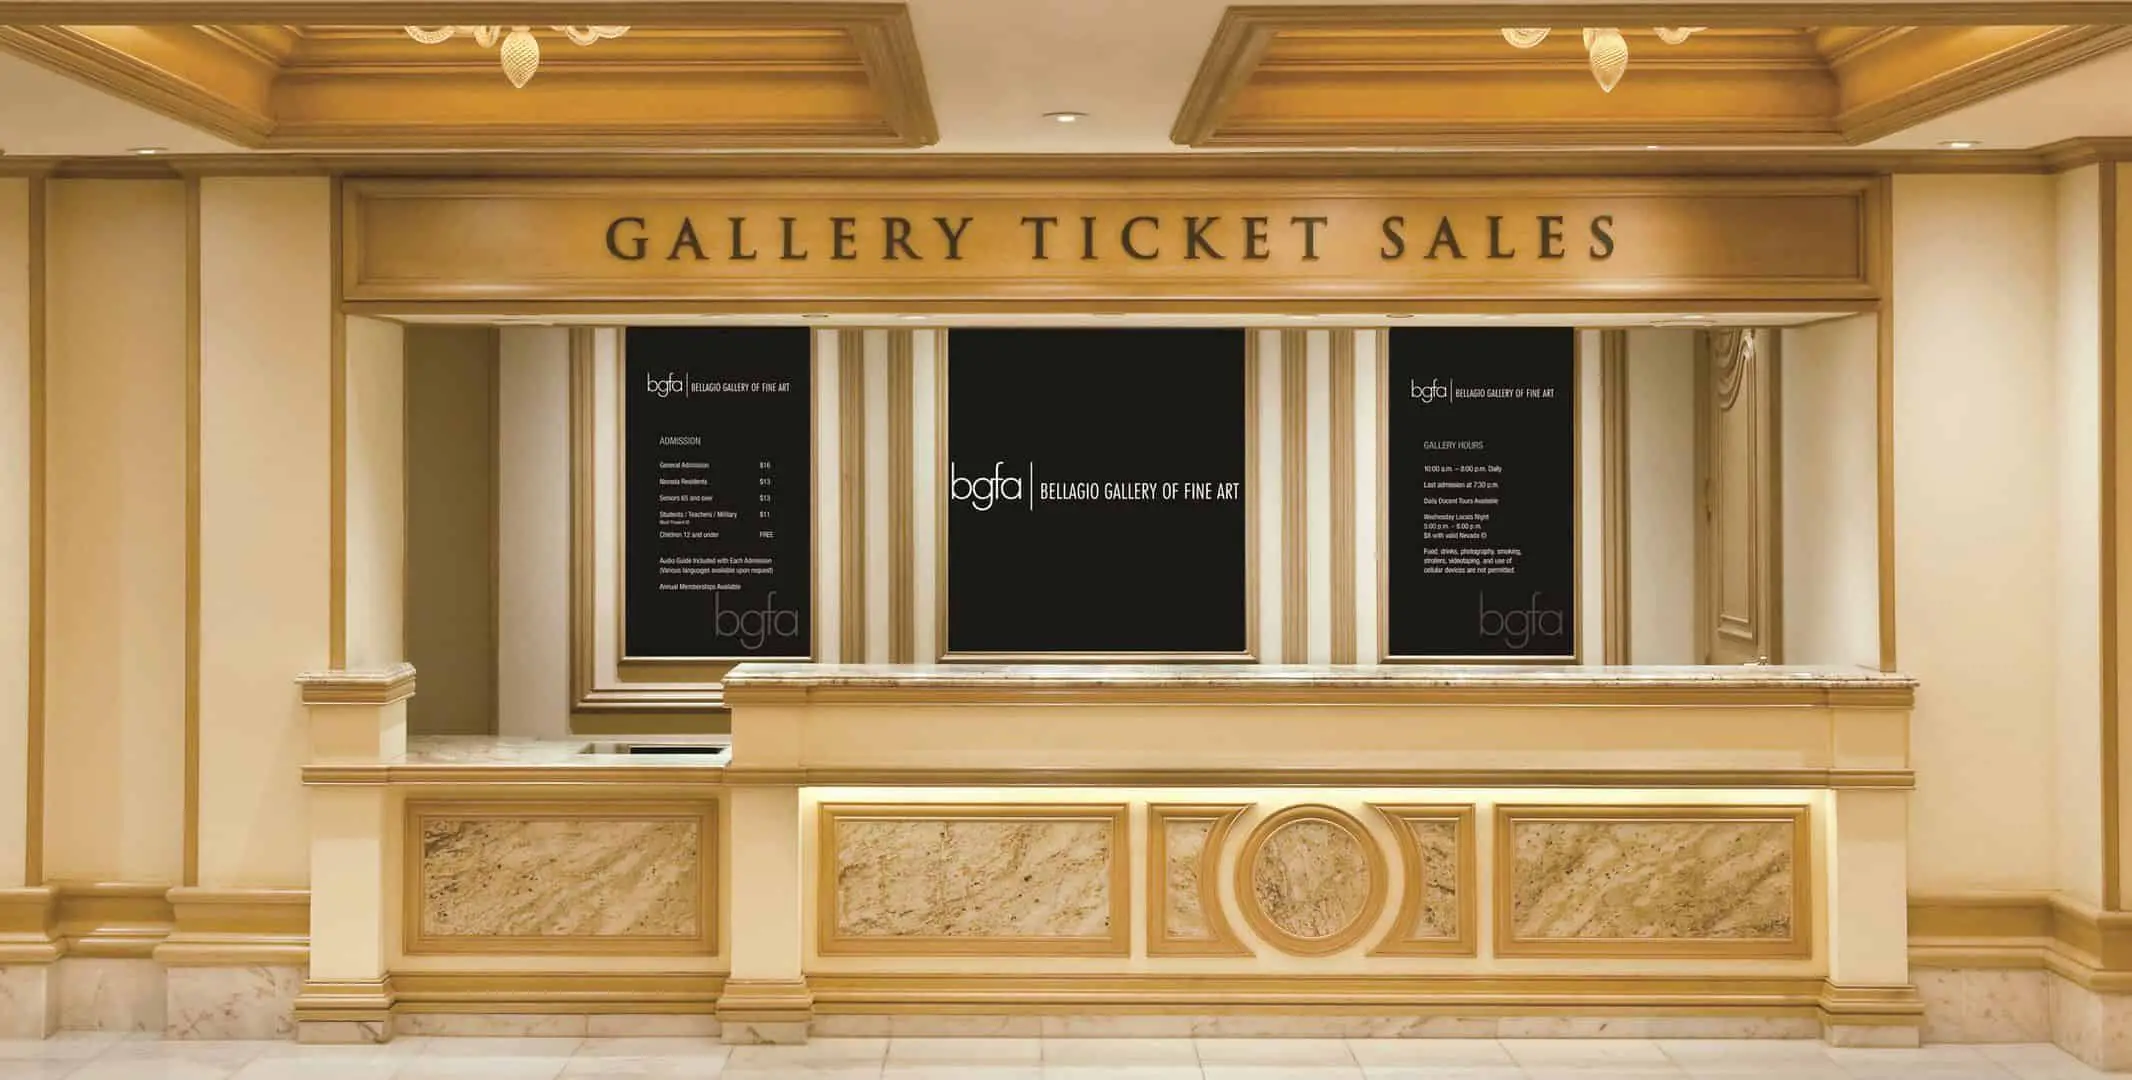 Bellagio Gallery of Fine Art Tickets, Admission Prices